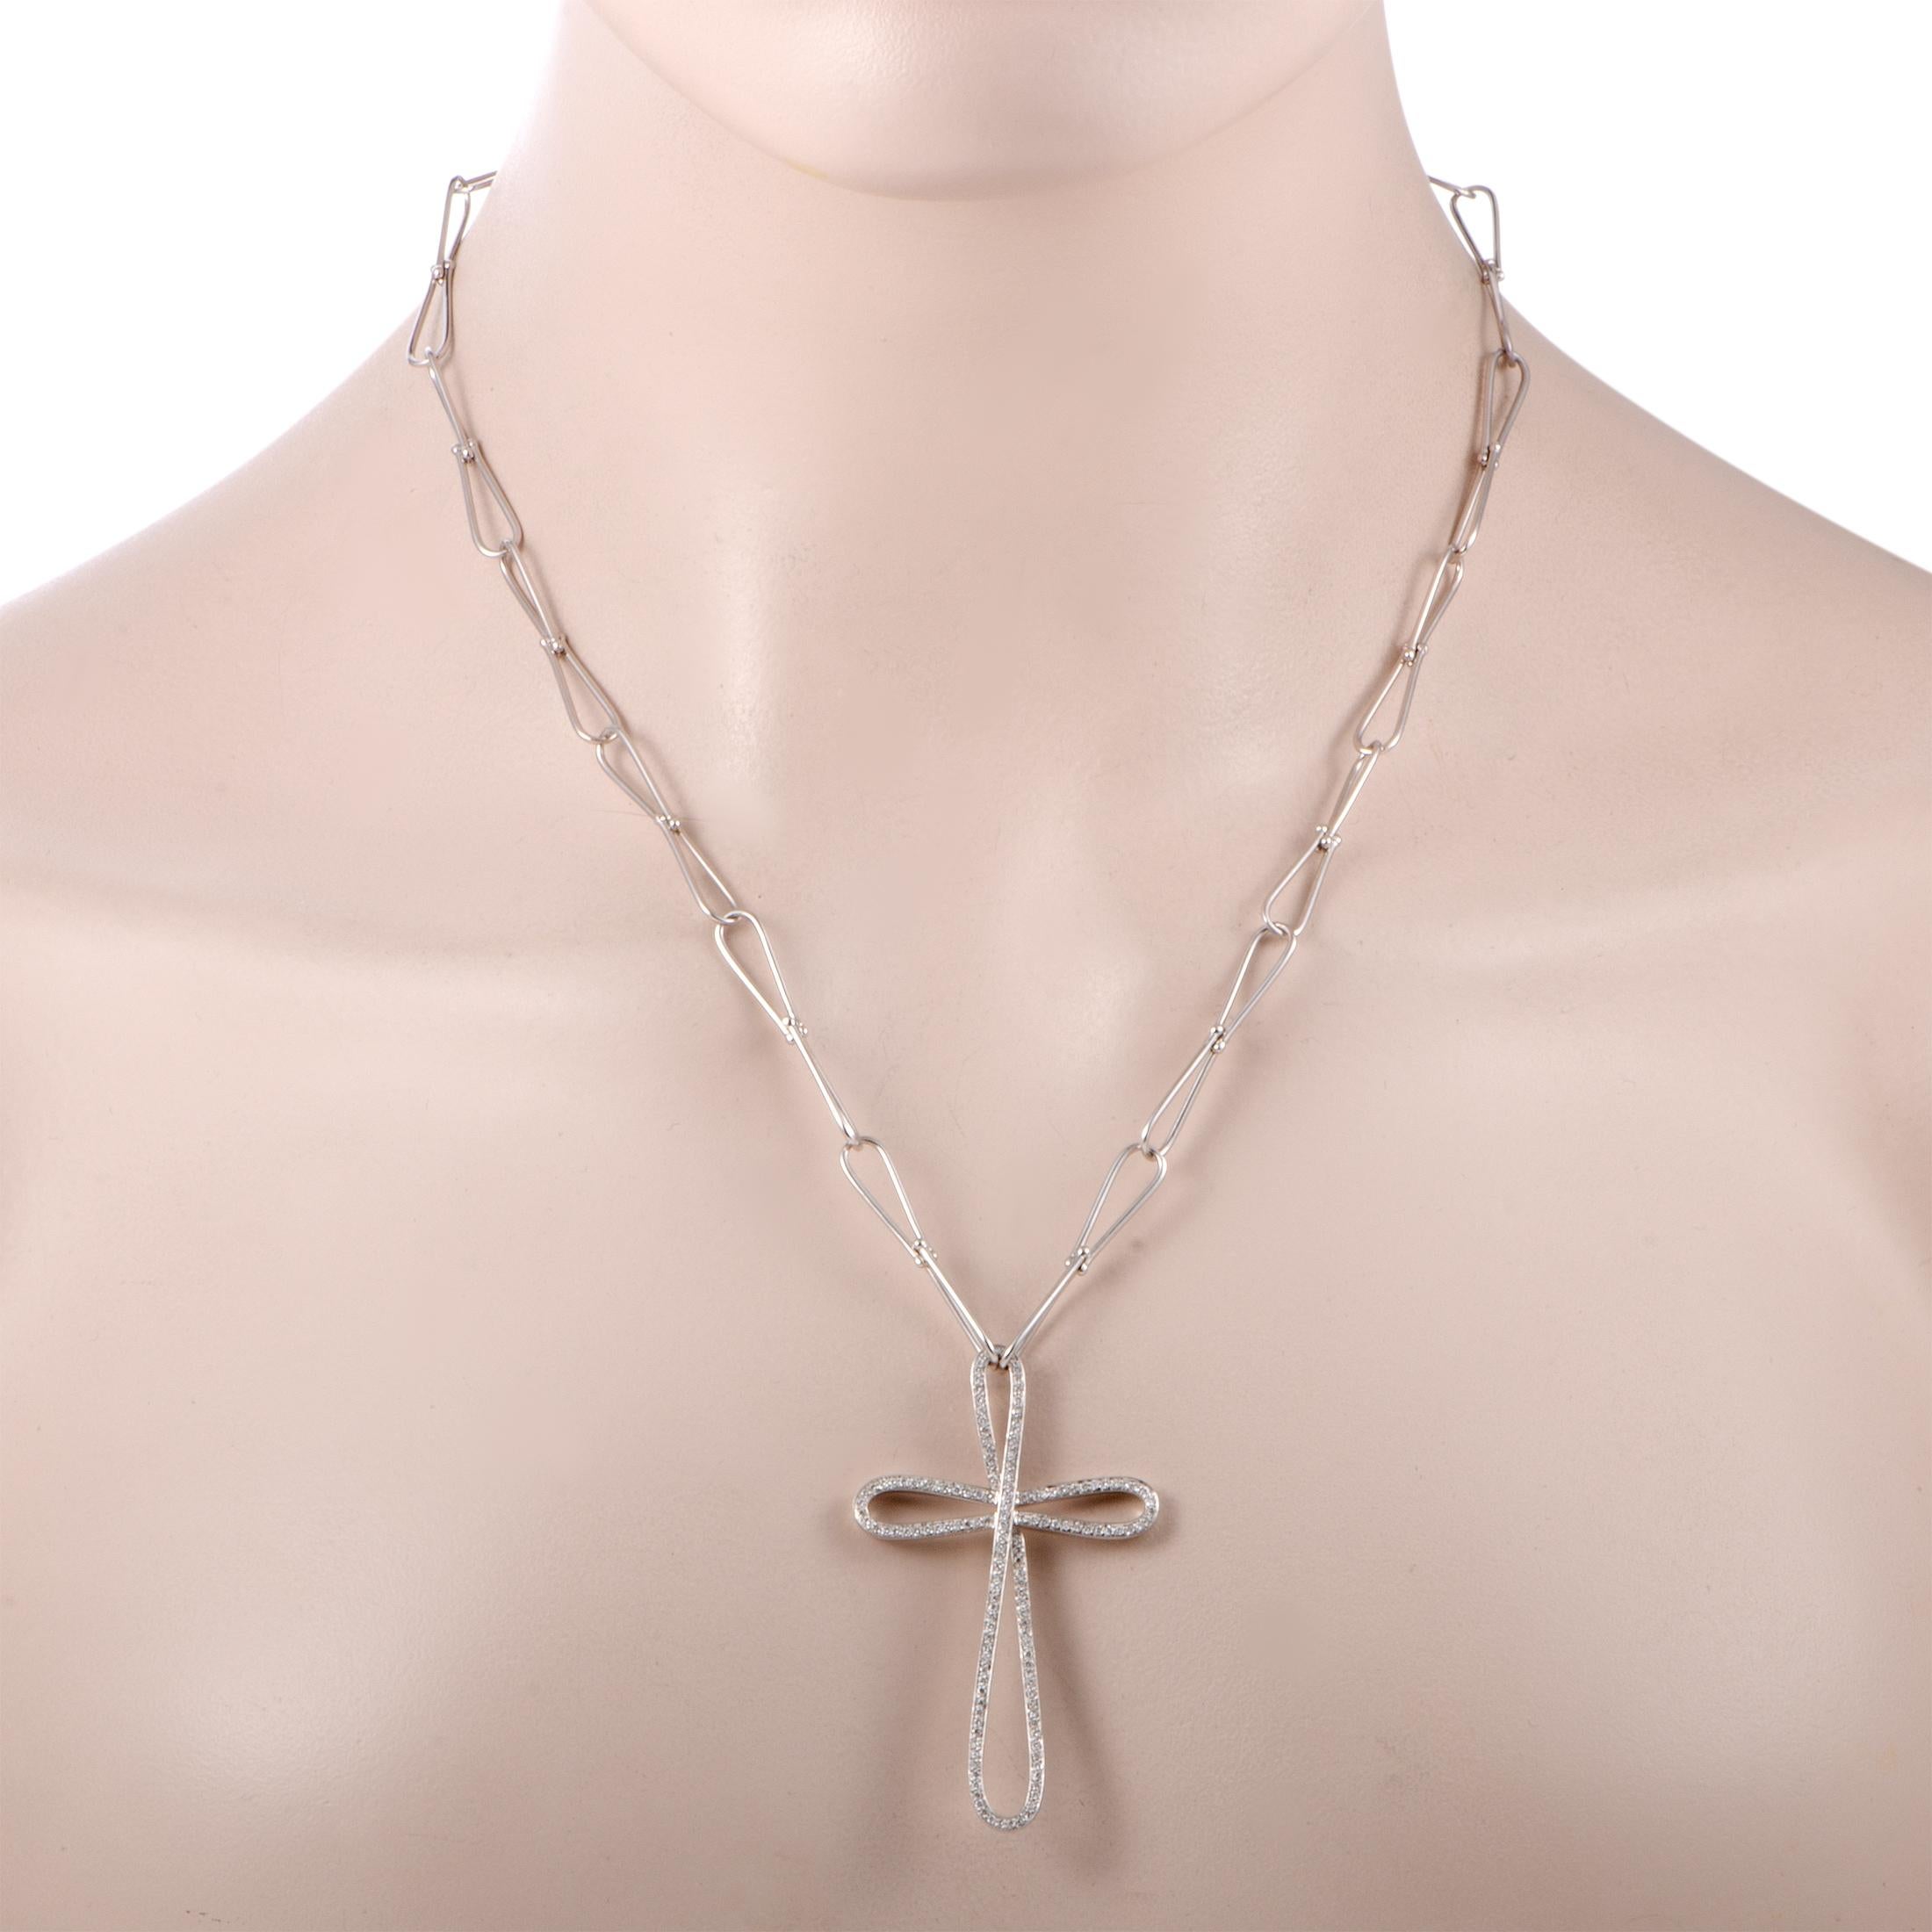 Carrying astonishing symbolic significance as well as enticing aesthetic value, the alluring motif of a cross is presented in a slightly unusual, gracefully smooth, and marvelously lavish fashion in this majestic necklace from Bucherer. Crafted from